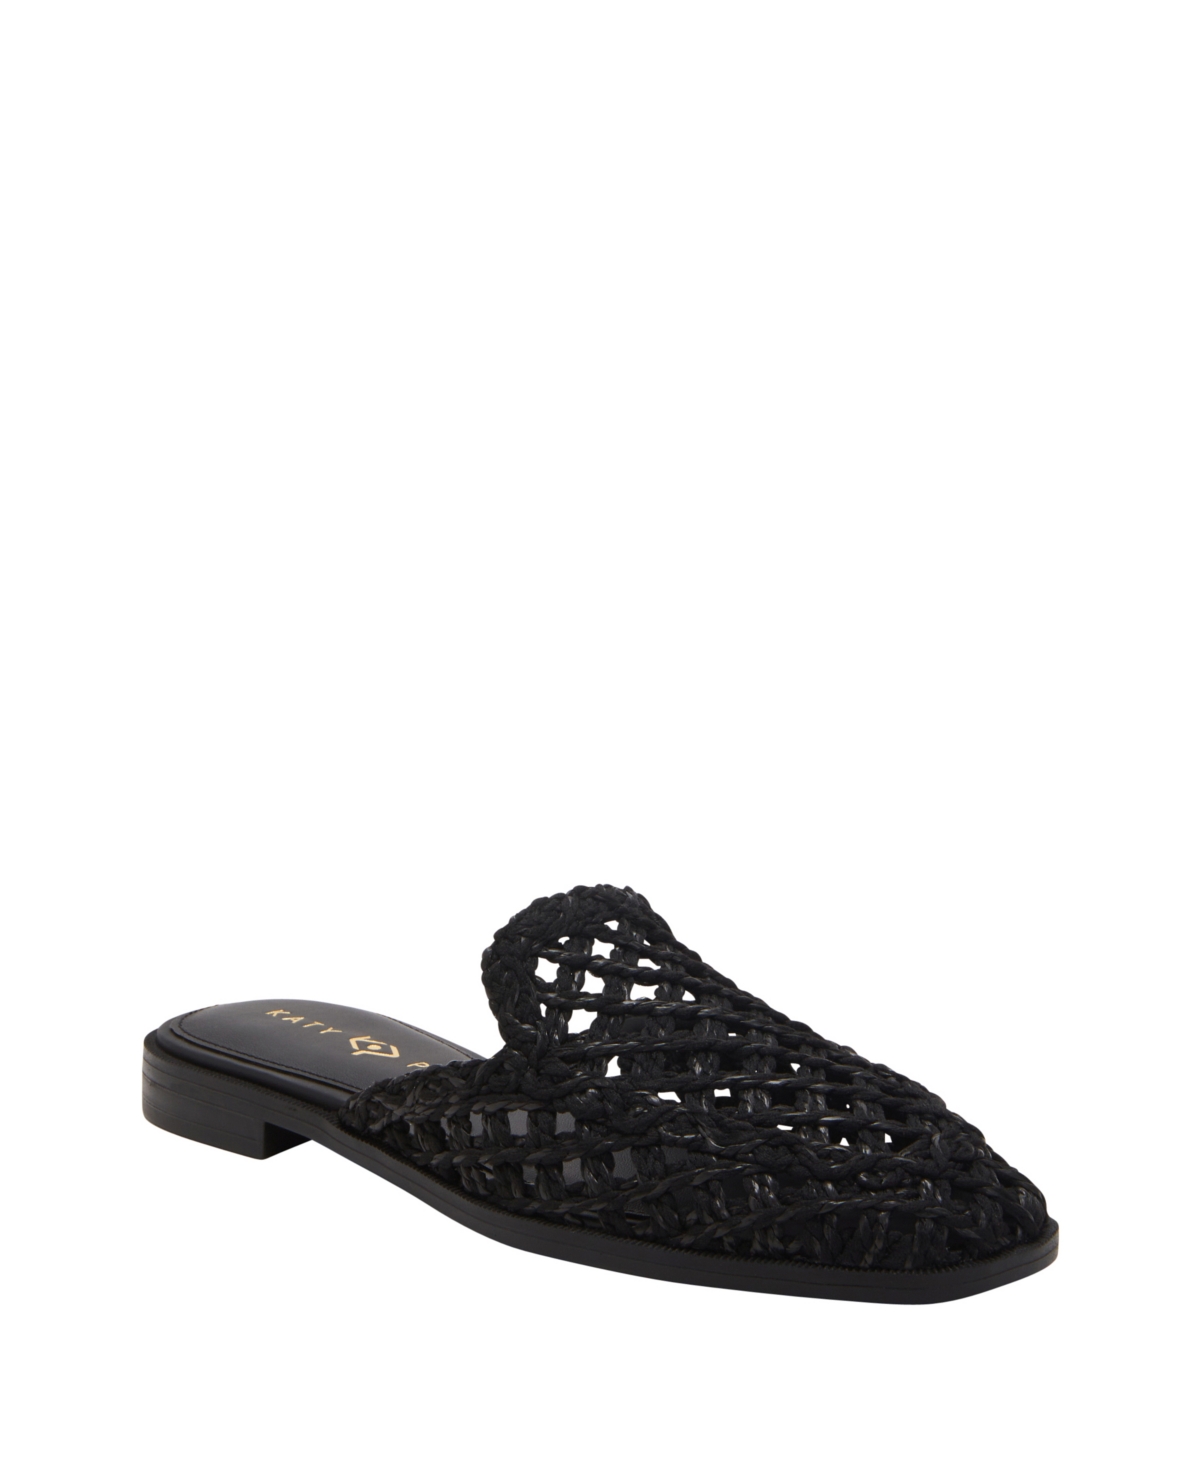 Women's Woven Slip-On Mules - Ginger Biscuit